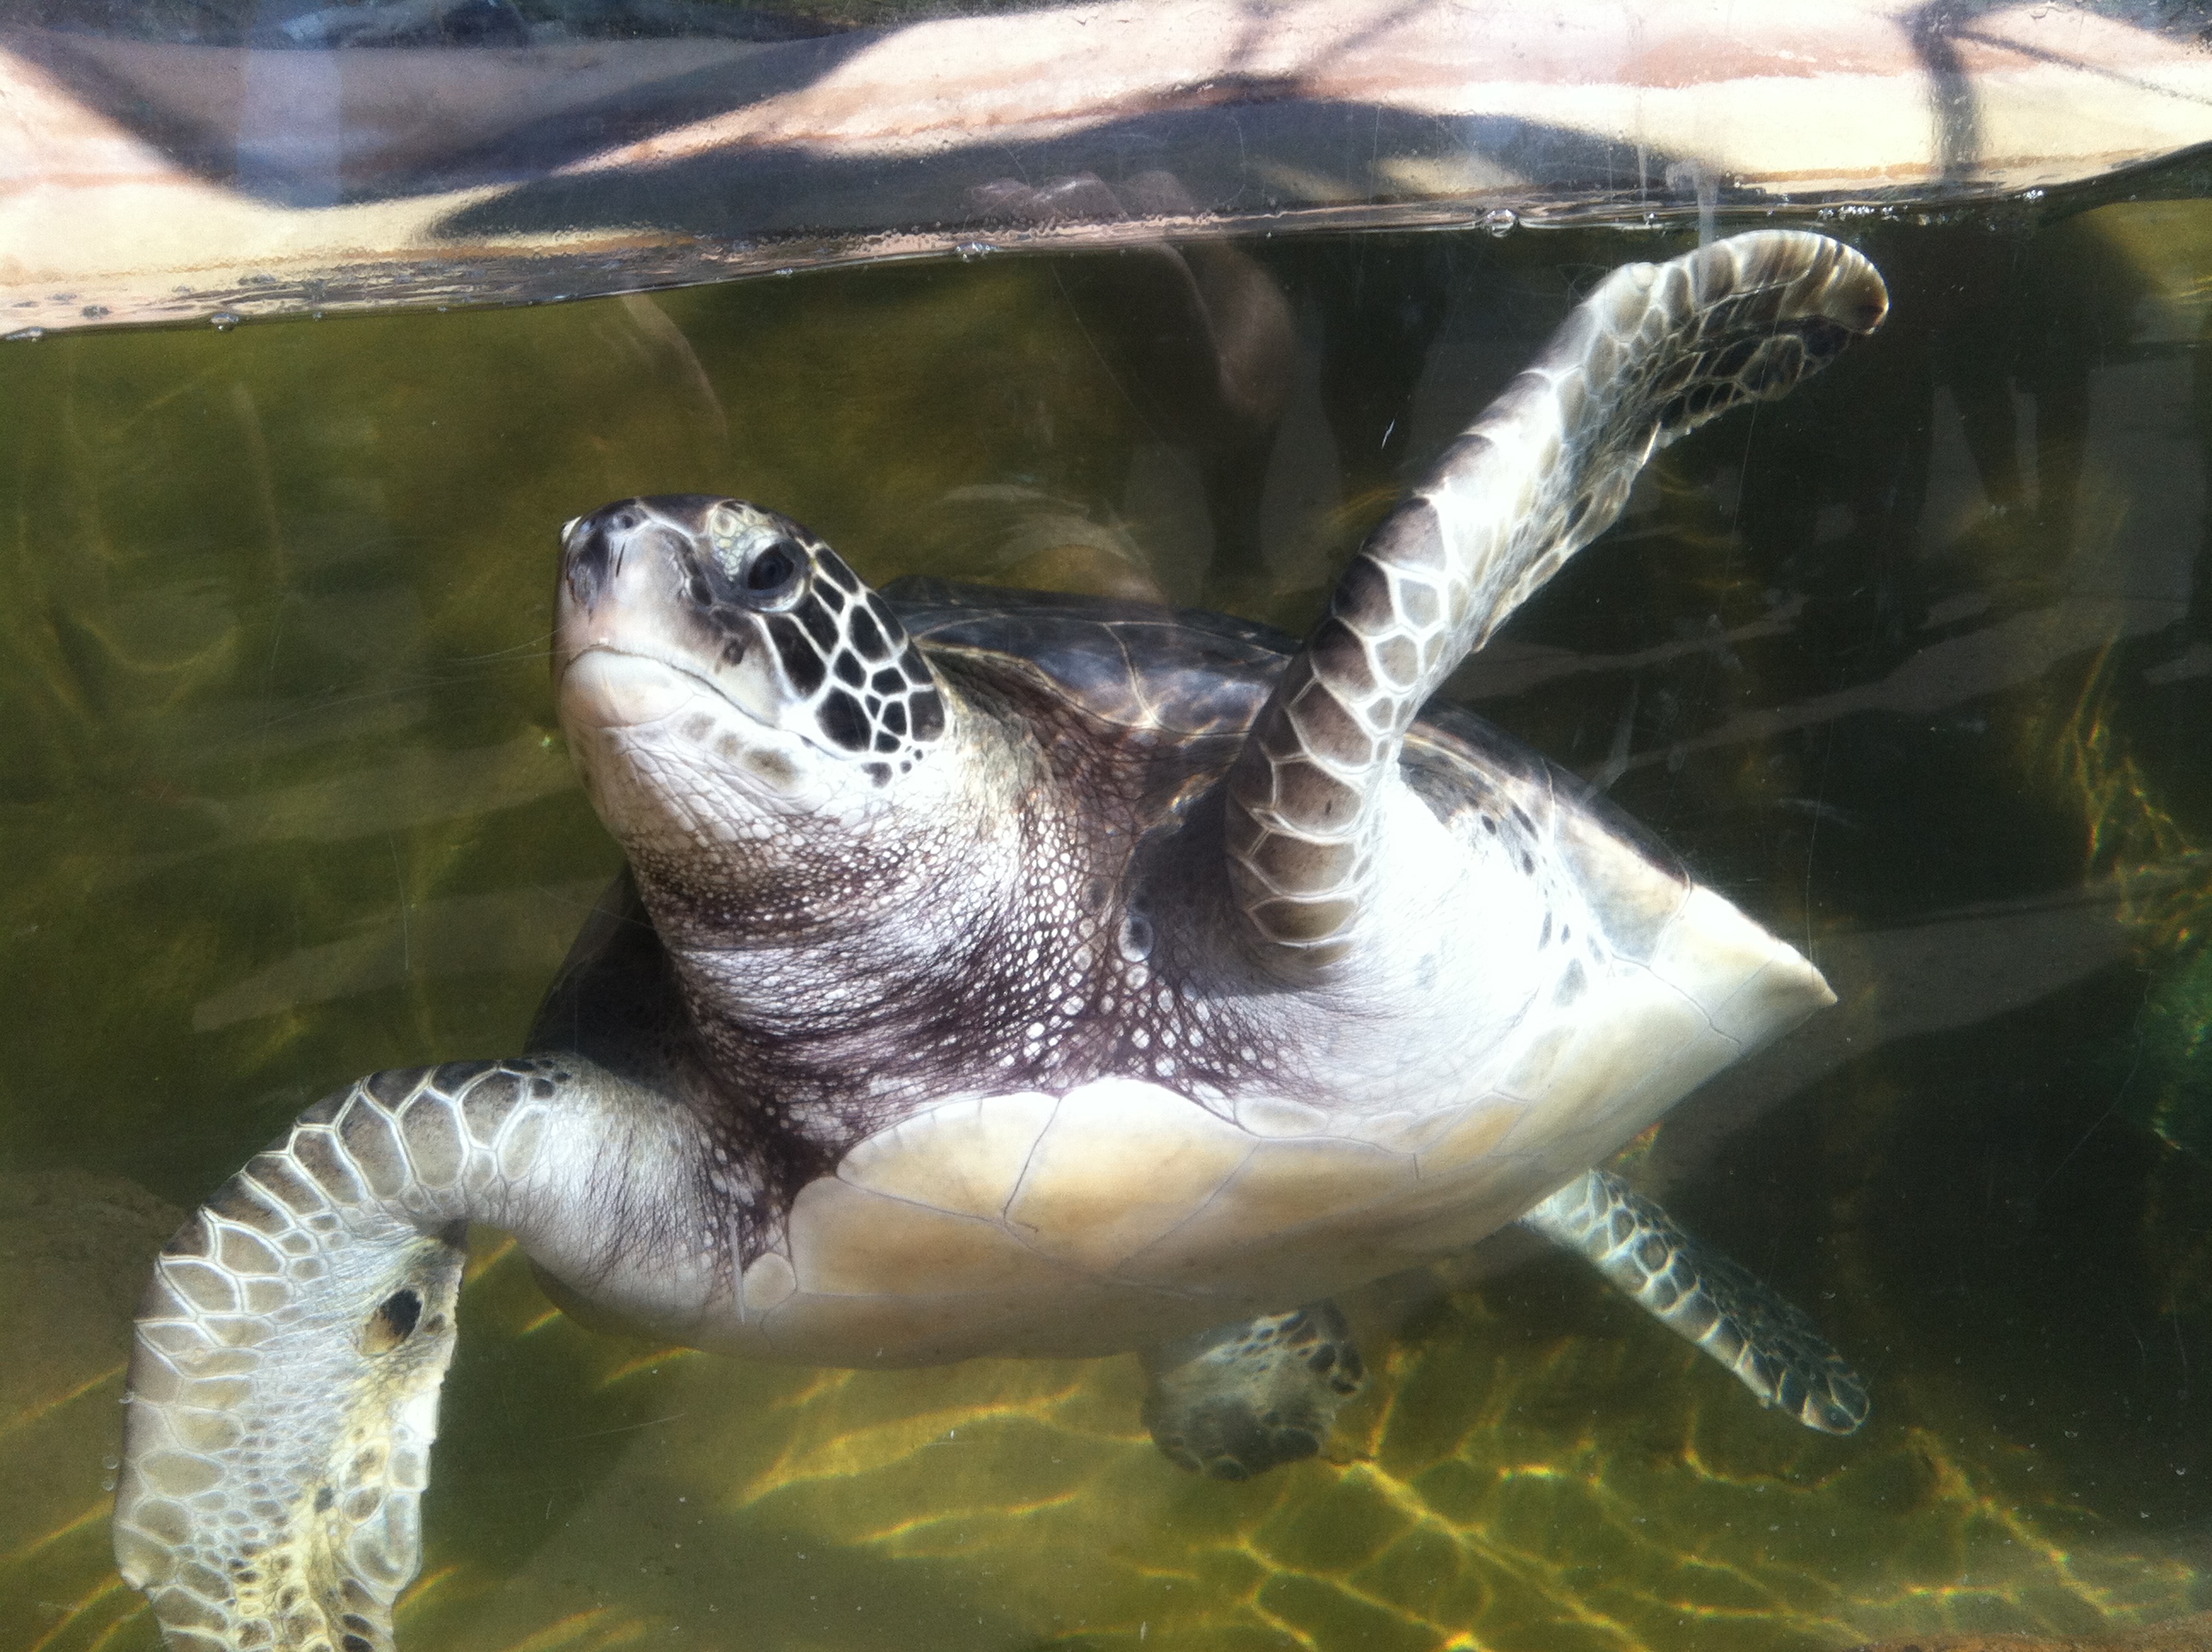 See sea turtles up close at Living Coast Discovery Center.